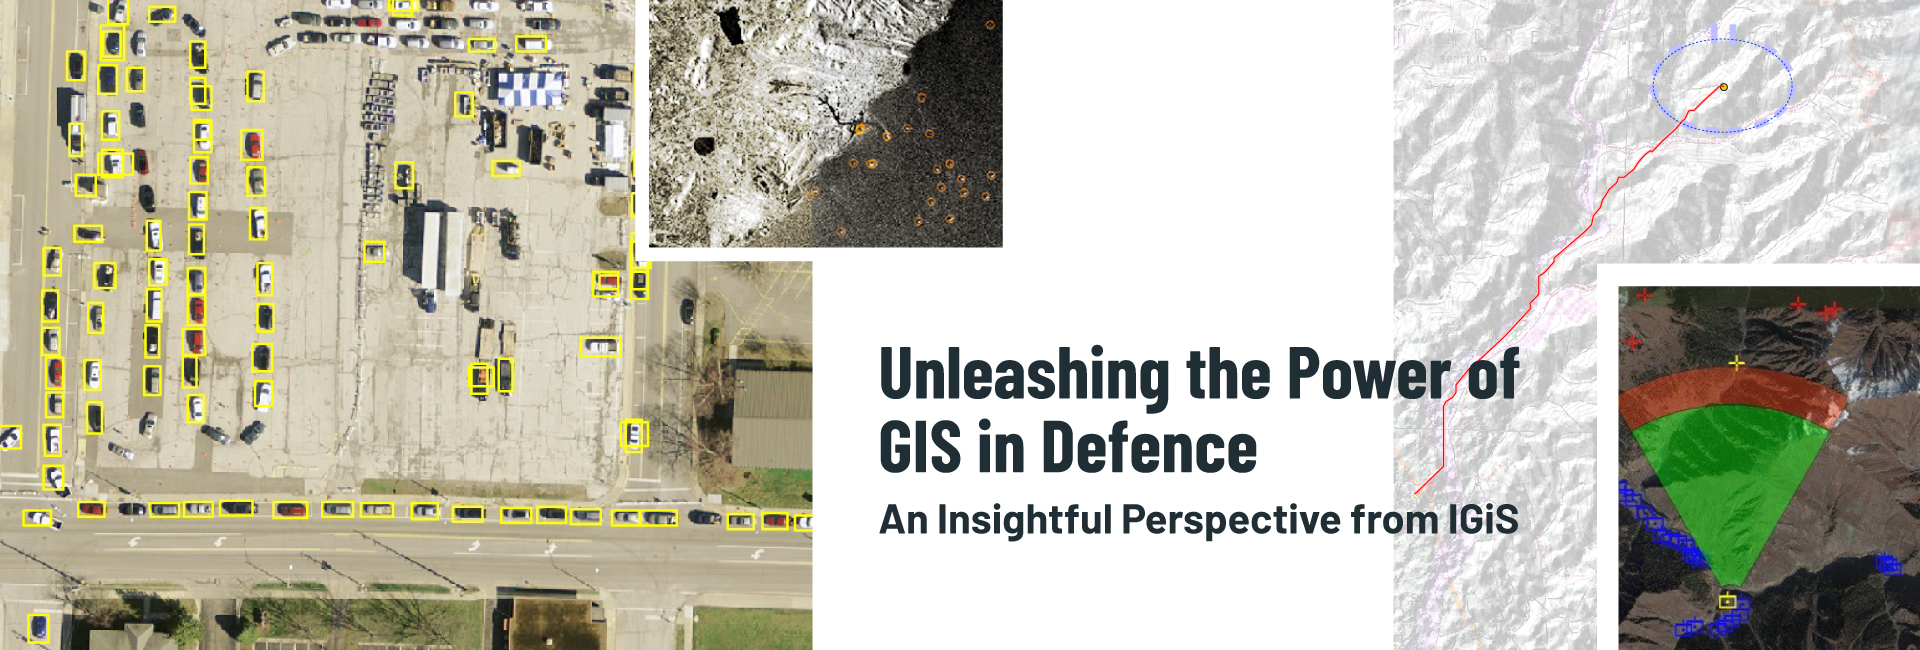 Unleashing the Power of GIS in Defence: An Insightful Perspective from IGiS